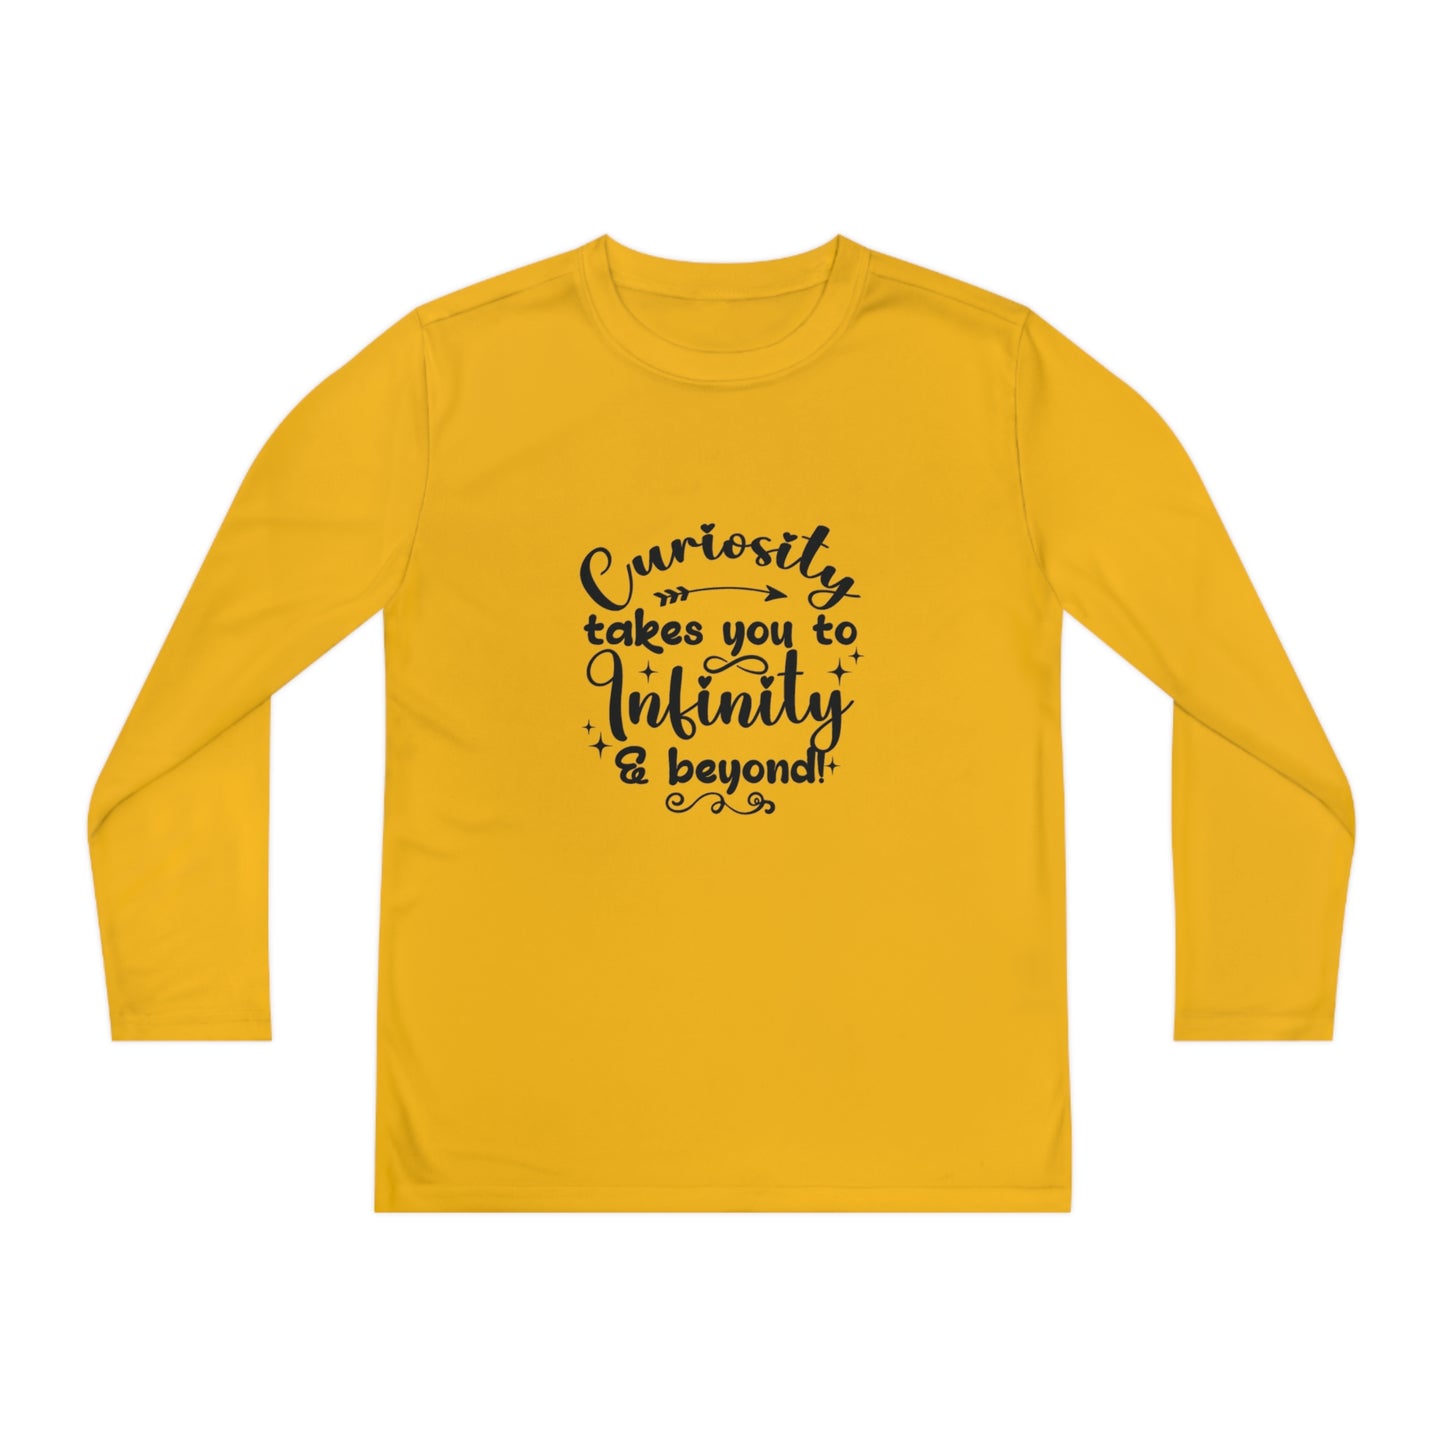 Youth Long Sleeve Competitor Tee - Infinity and Beyond